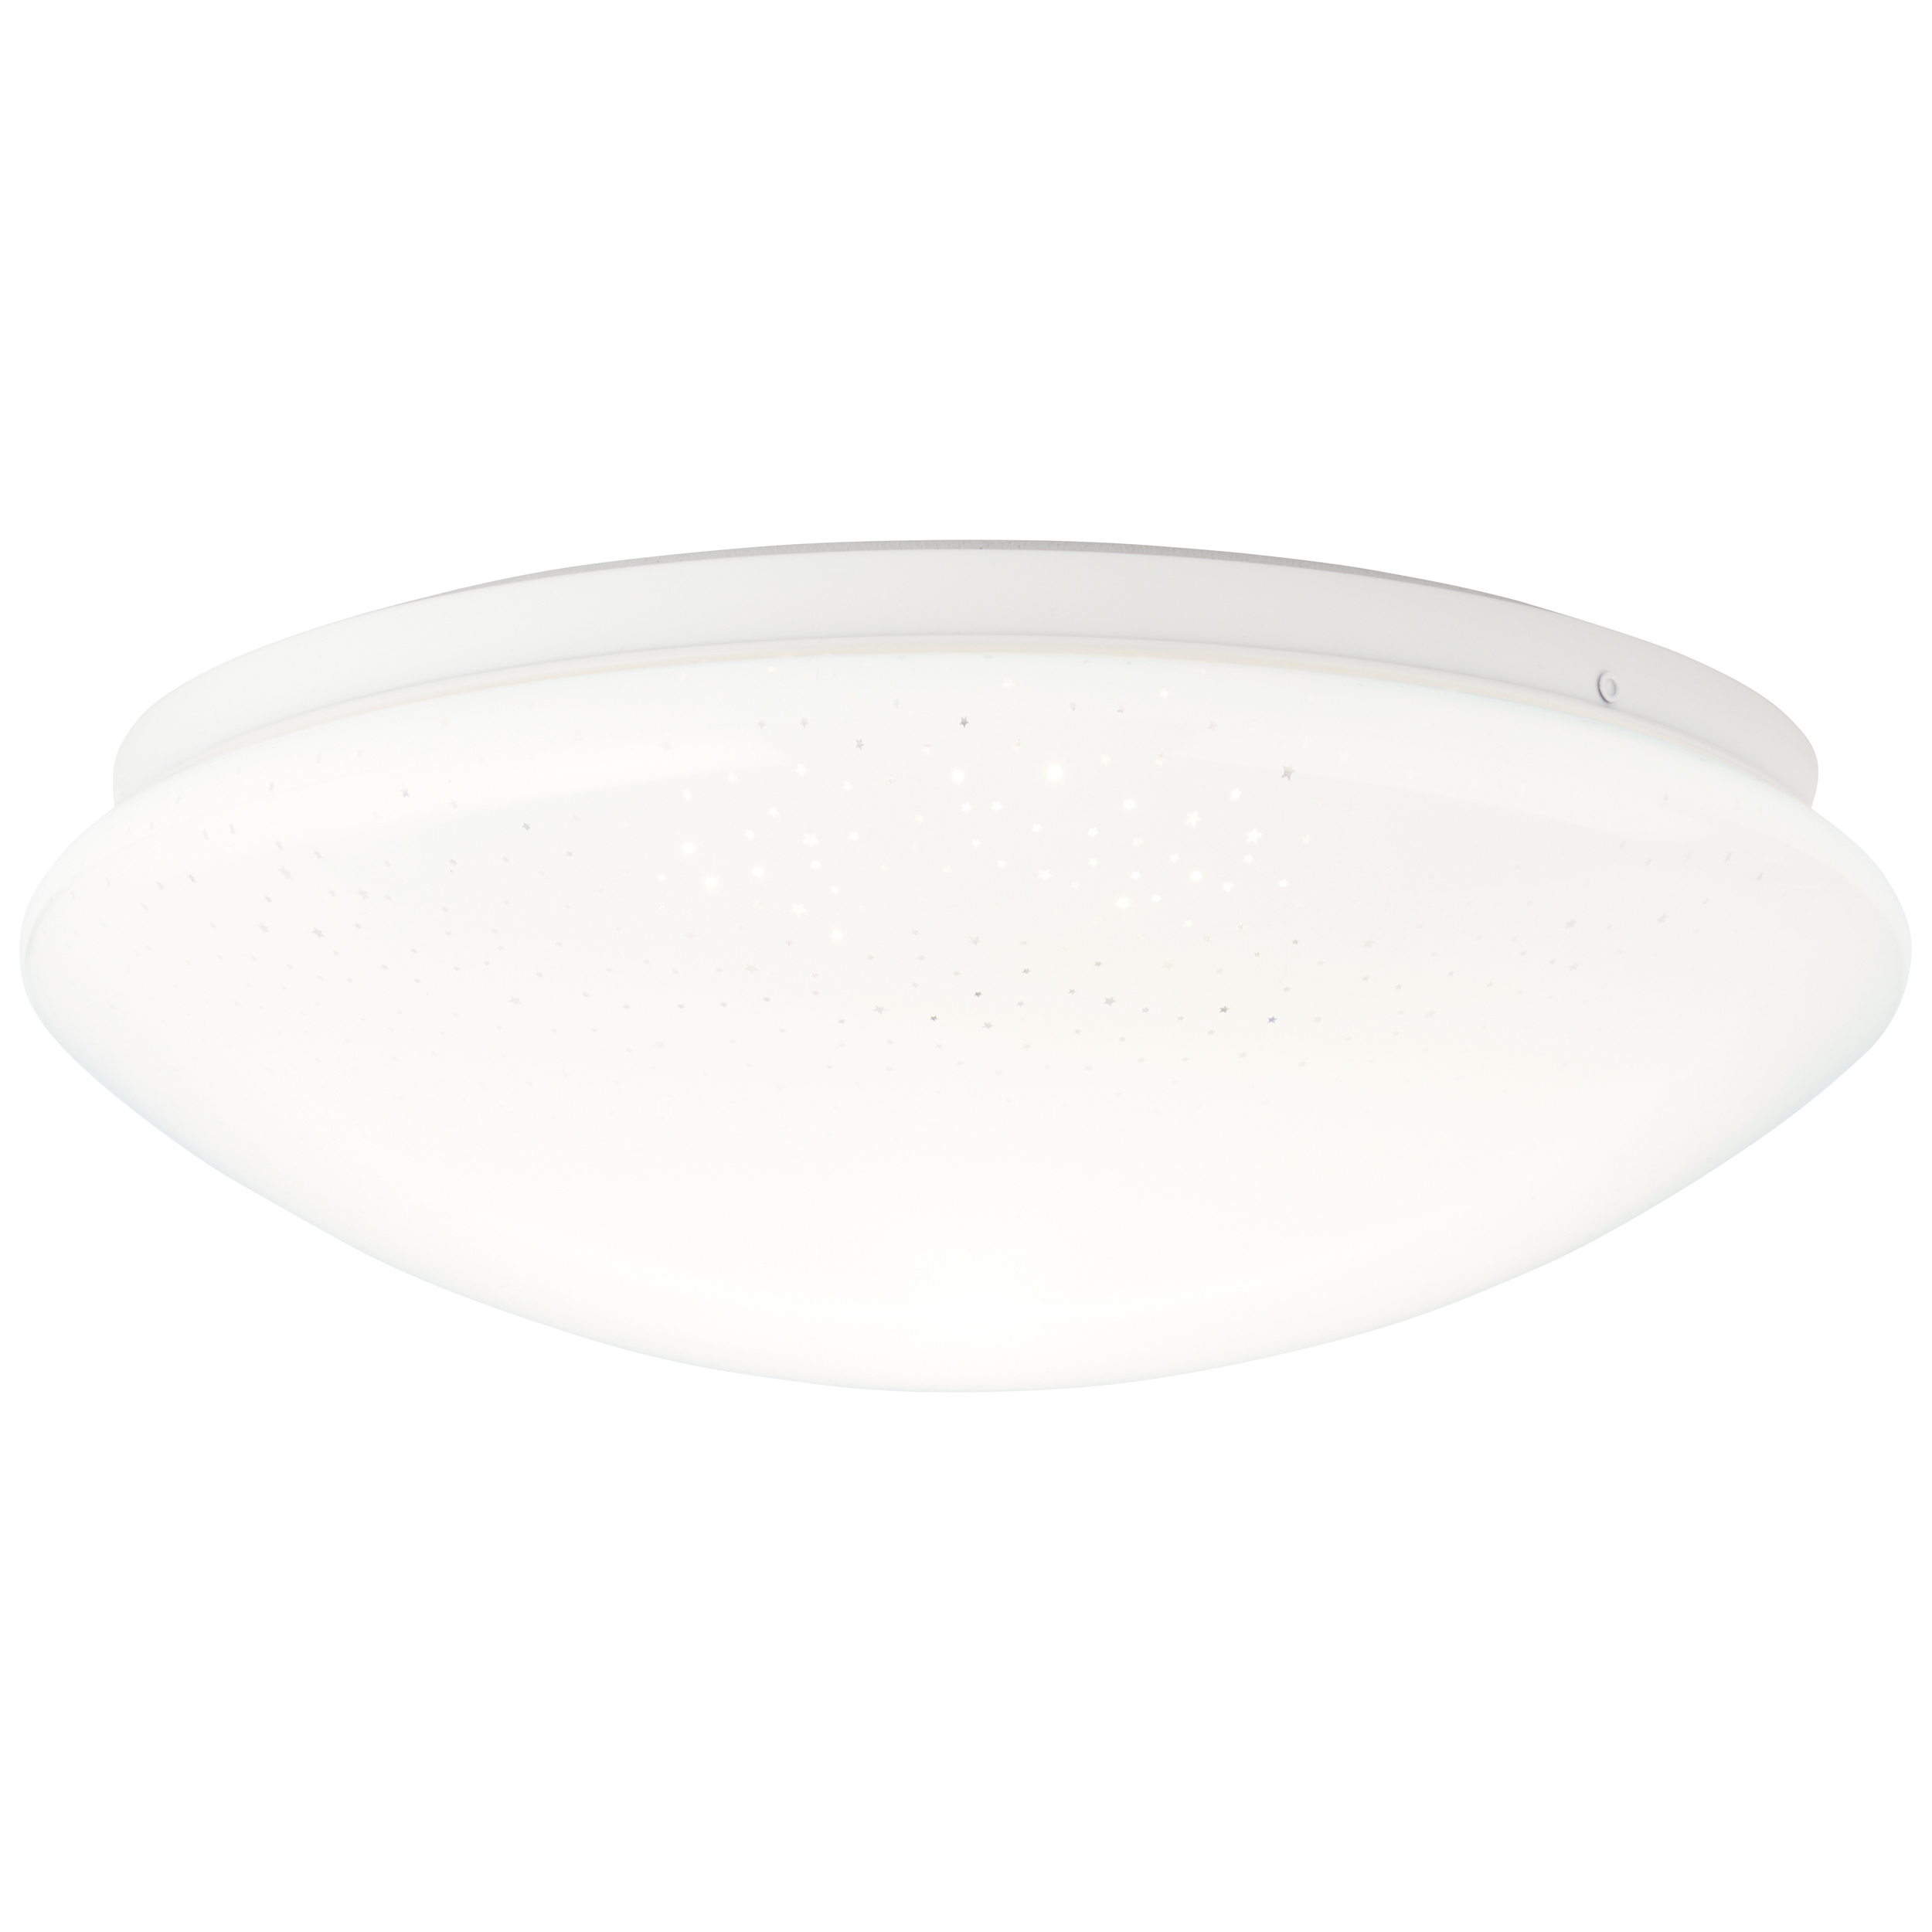 Fakir Starry LED wall and ceiling light 33cm white/cold white